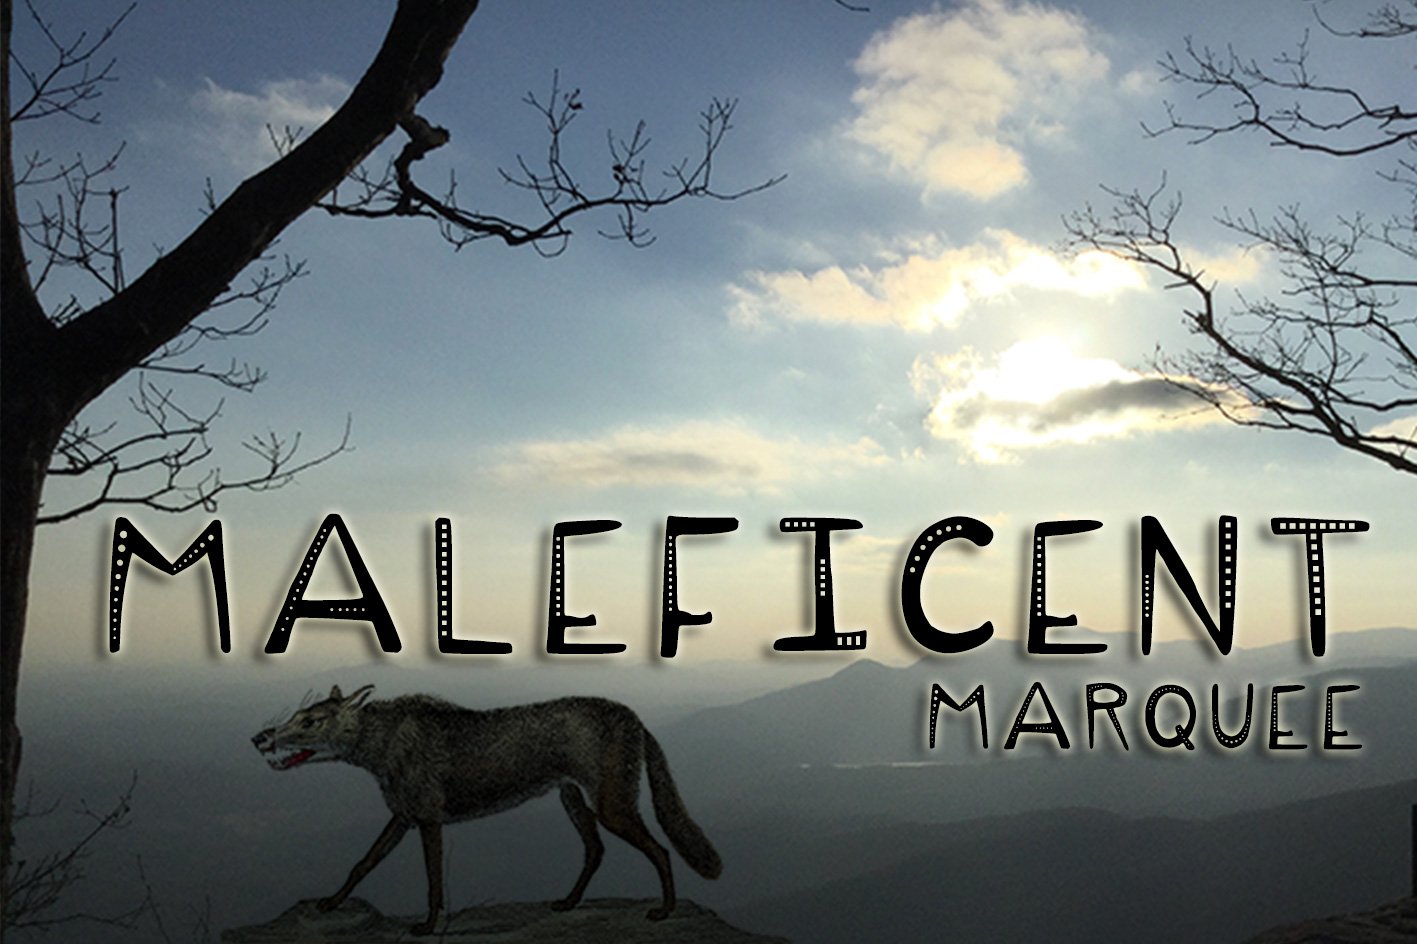 Maleficent Marquee Menacing Typeface cover image.